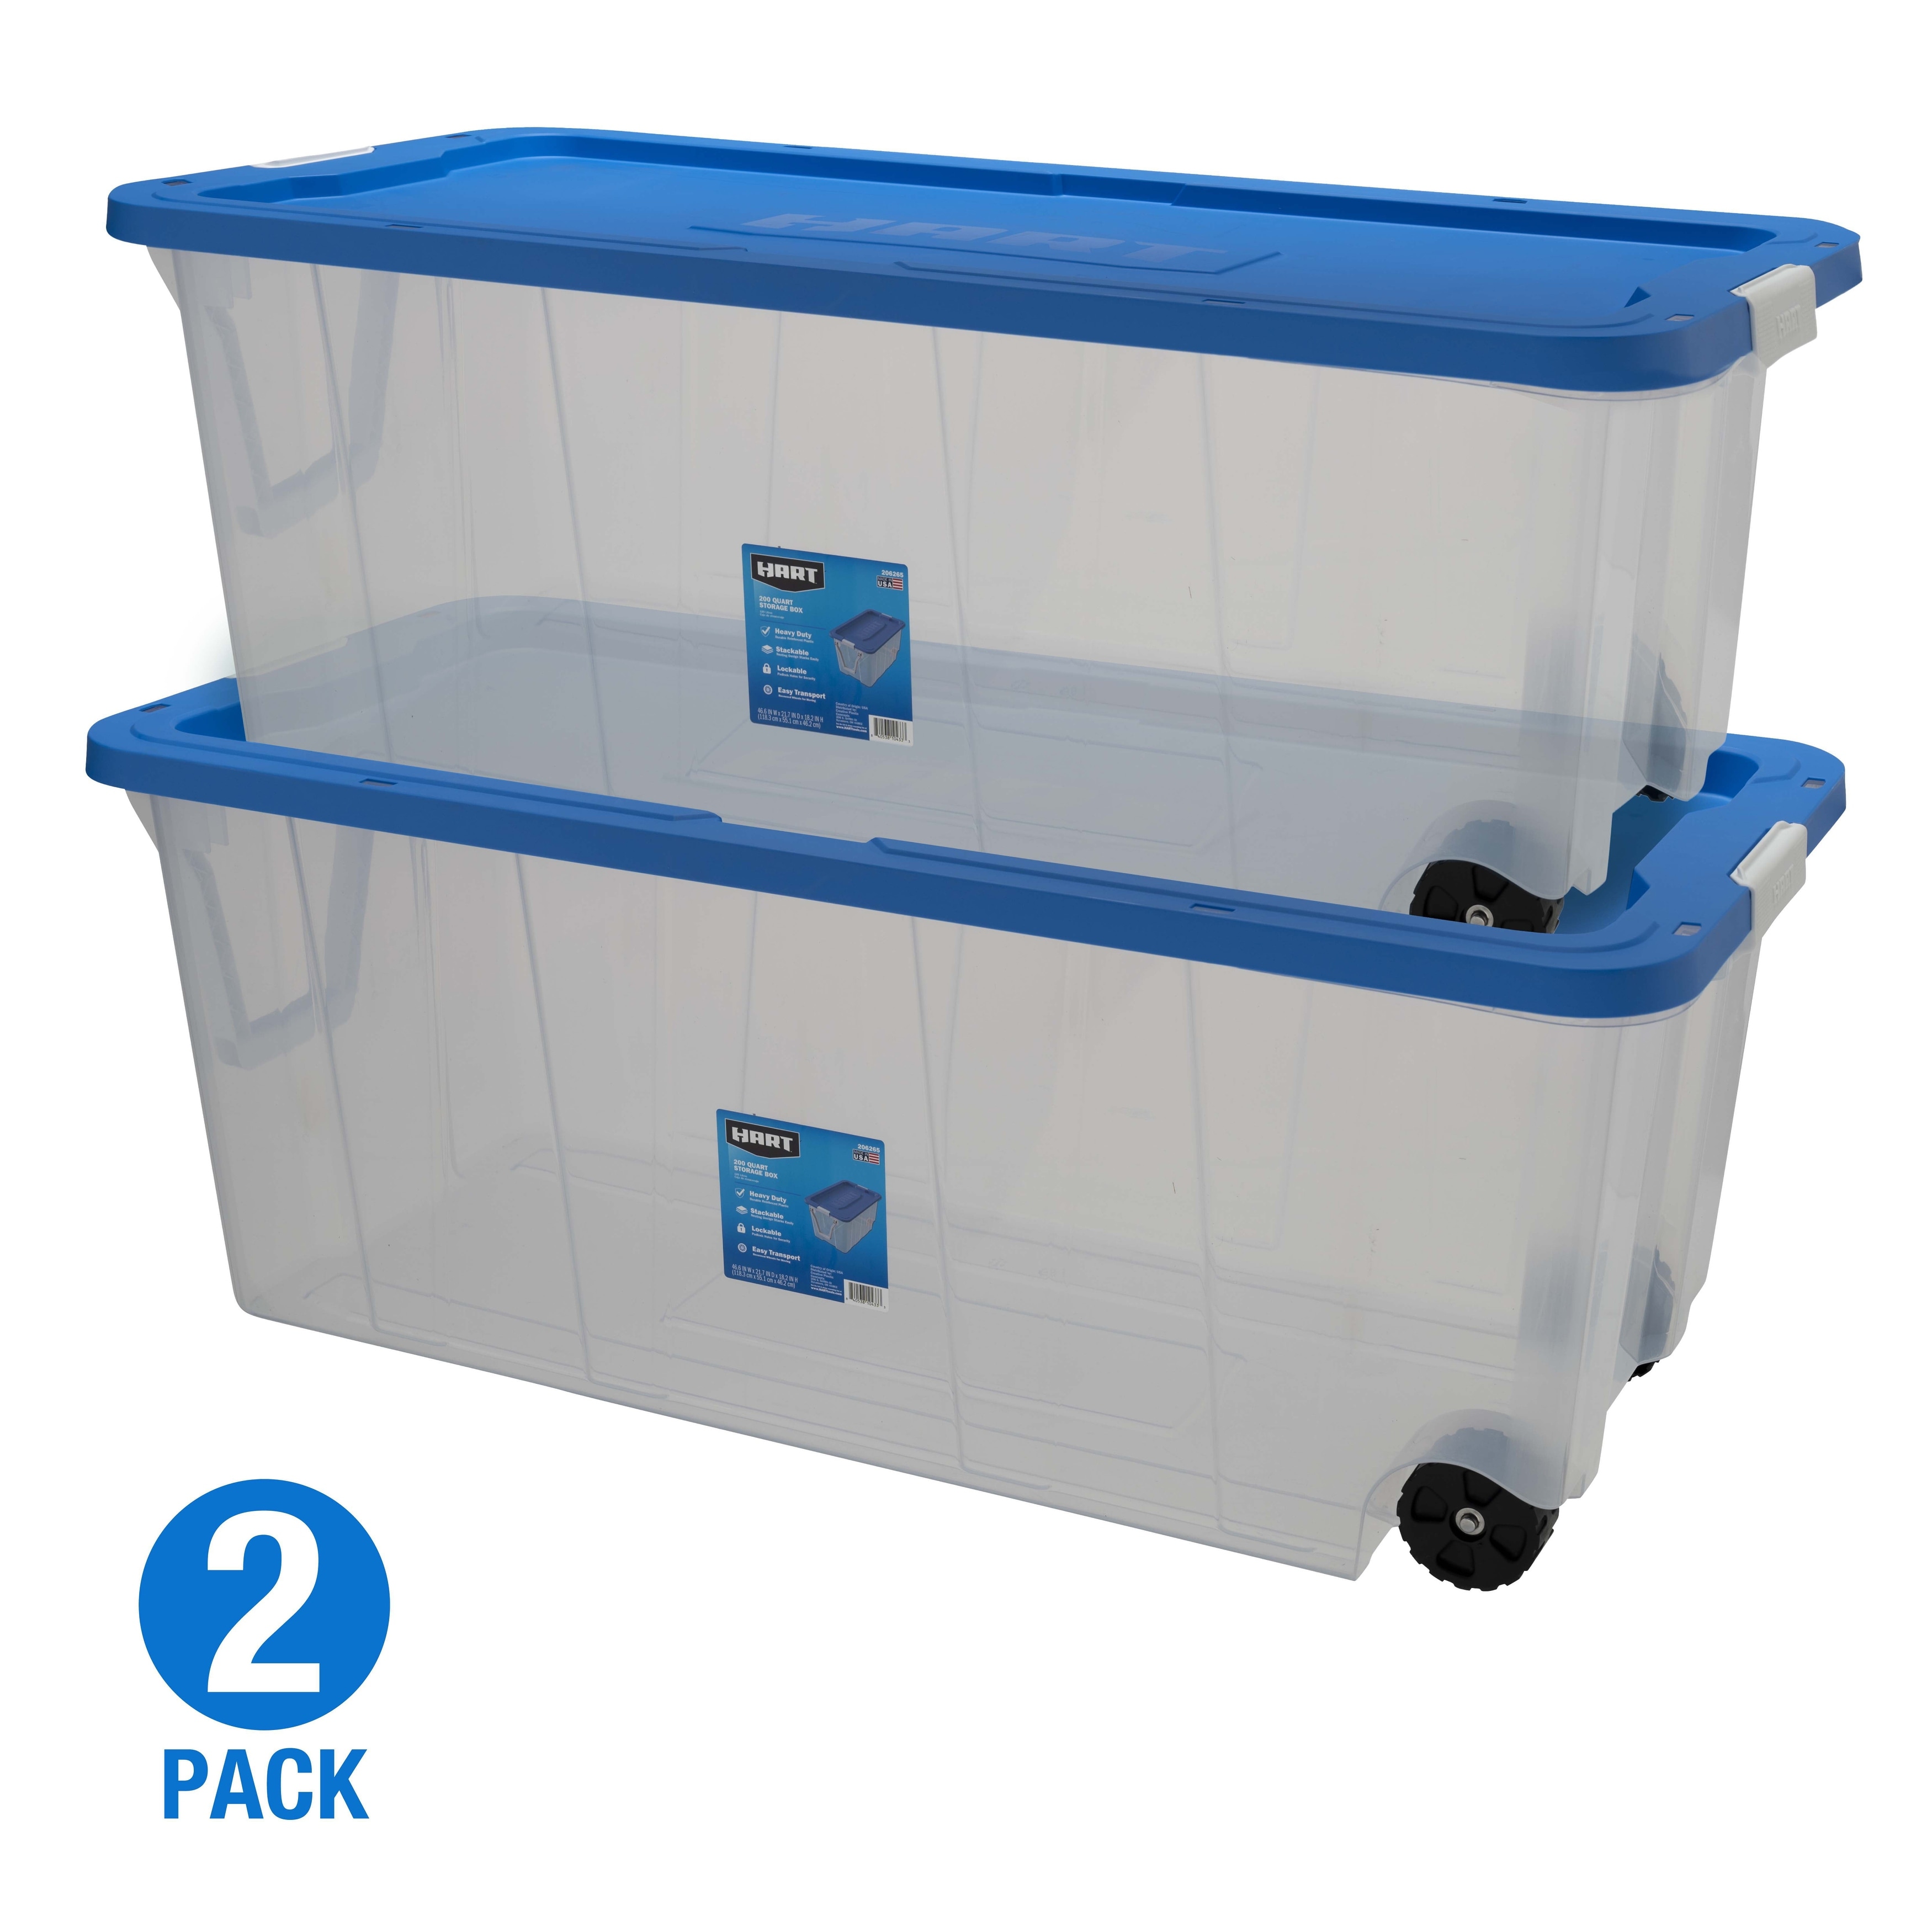 https://ak1.ostkcdn.com/images/products/is/images/direct/9e8b7ccdb12e745fbd31af05aa8cb301b9e0b6f8/200-Quart-Clear-Latching-Rolling-Plastic-Storage-Bin%2C-Clear-Tote-Blue-Lid%2C-Set-of-2.jpg